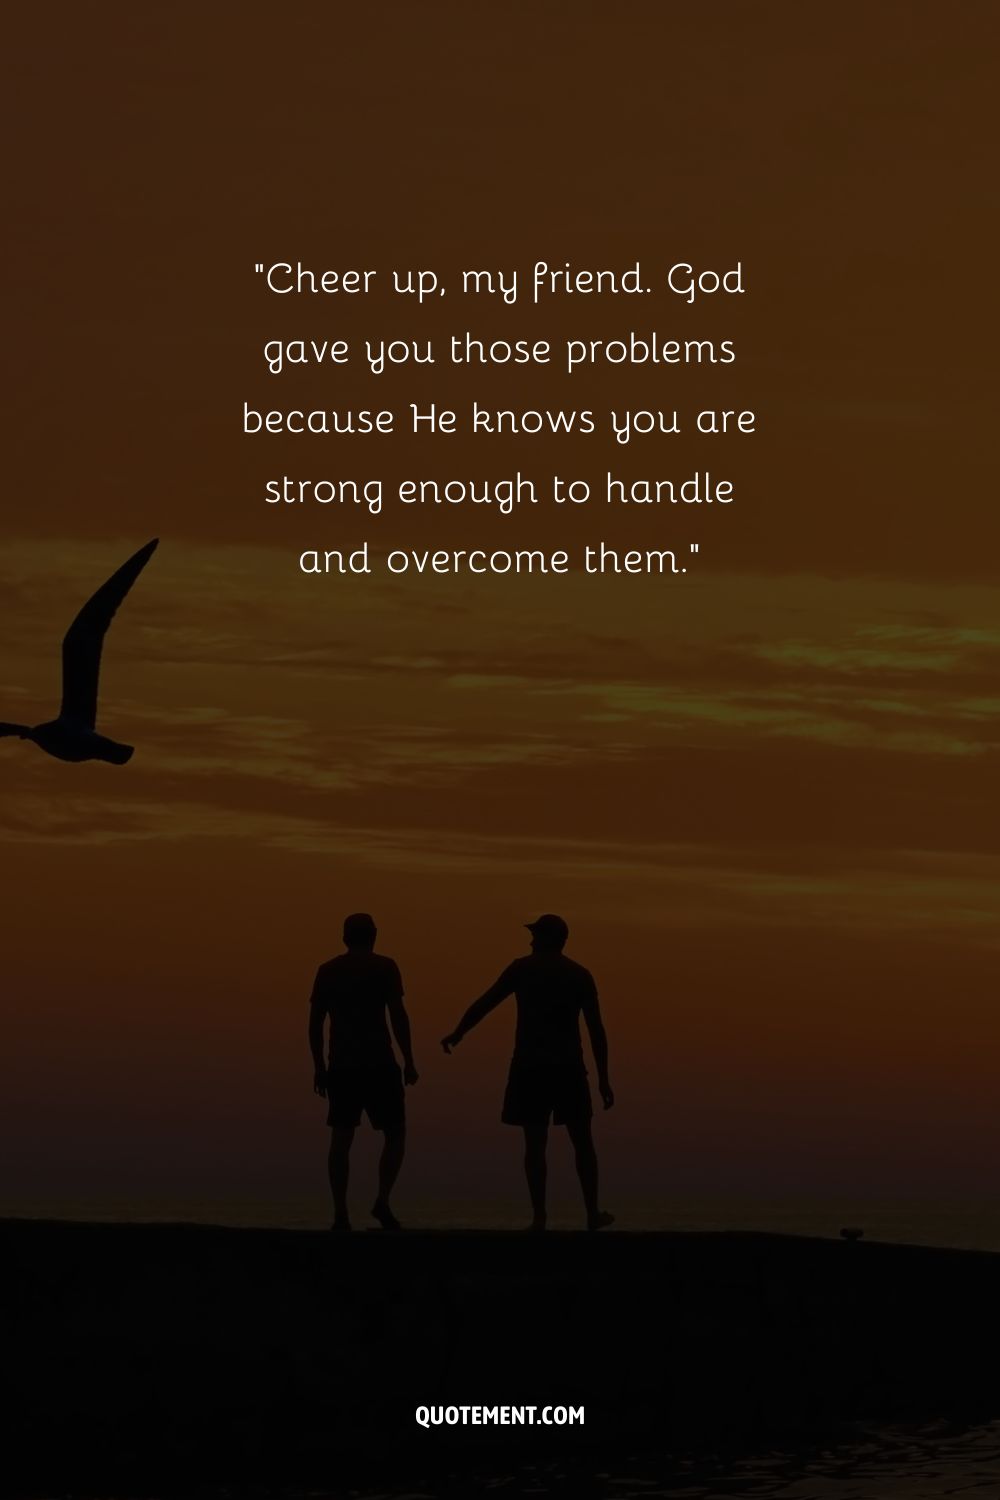 two male friends walking representing spiritual words to encourage friends